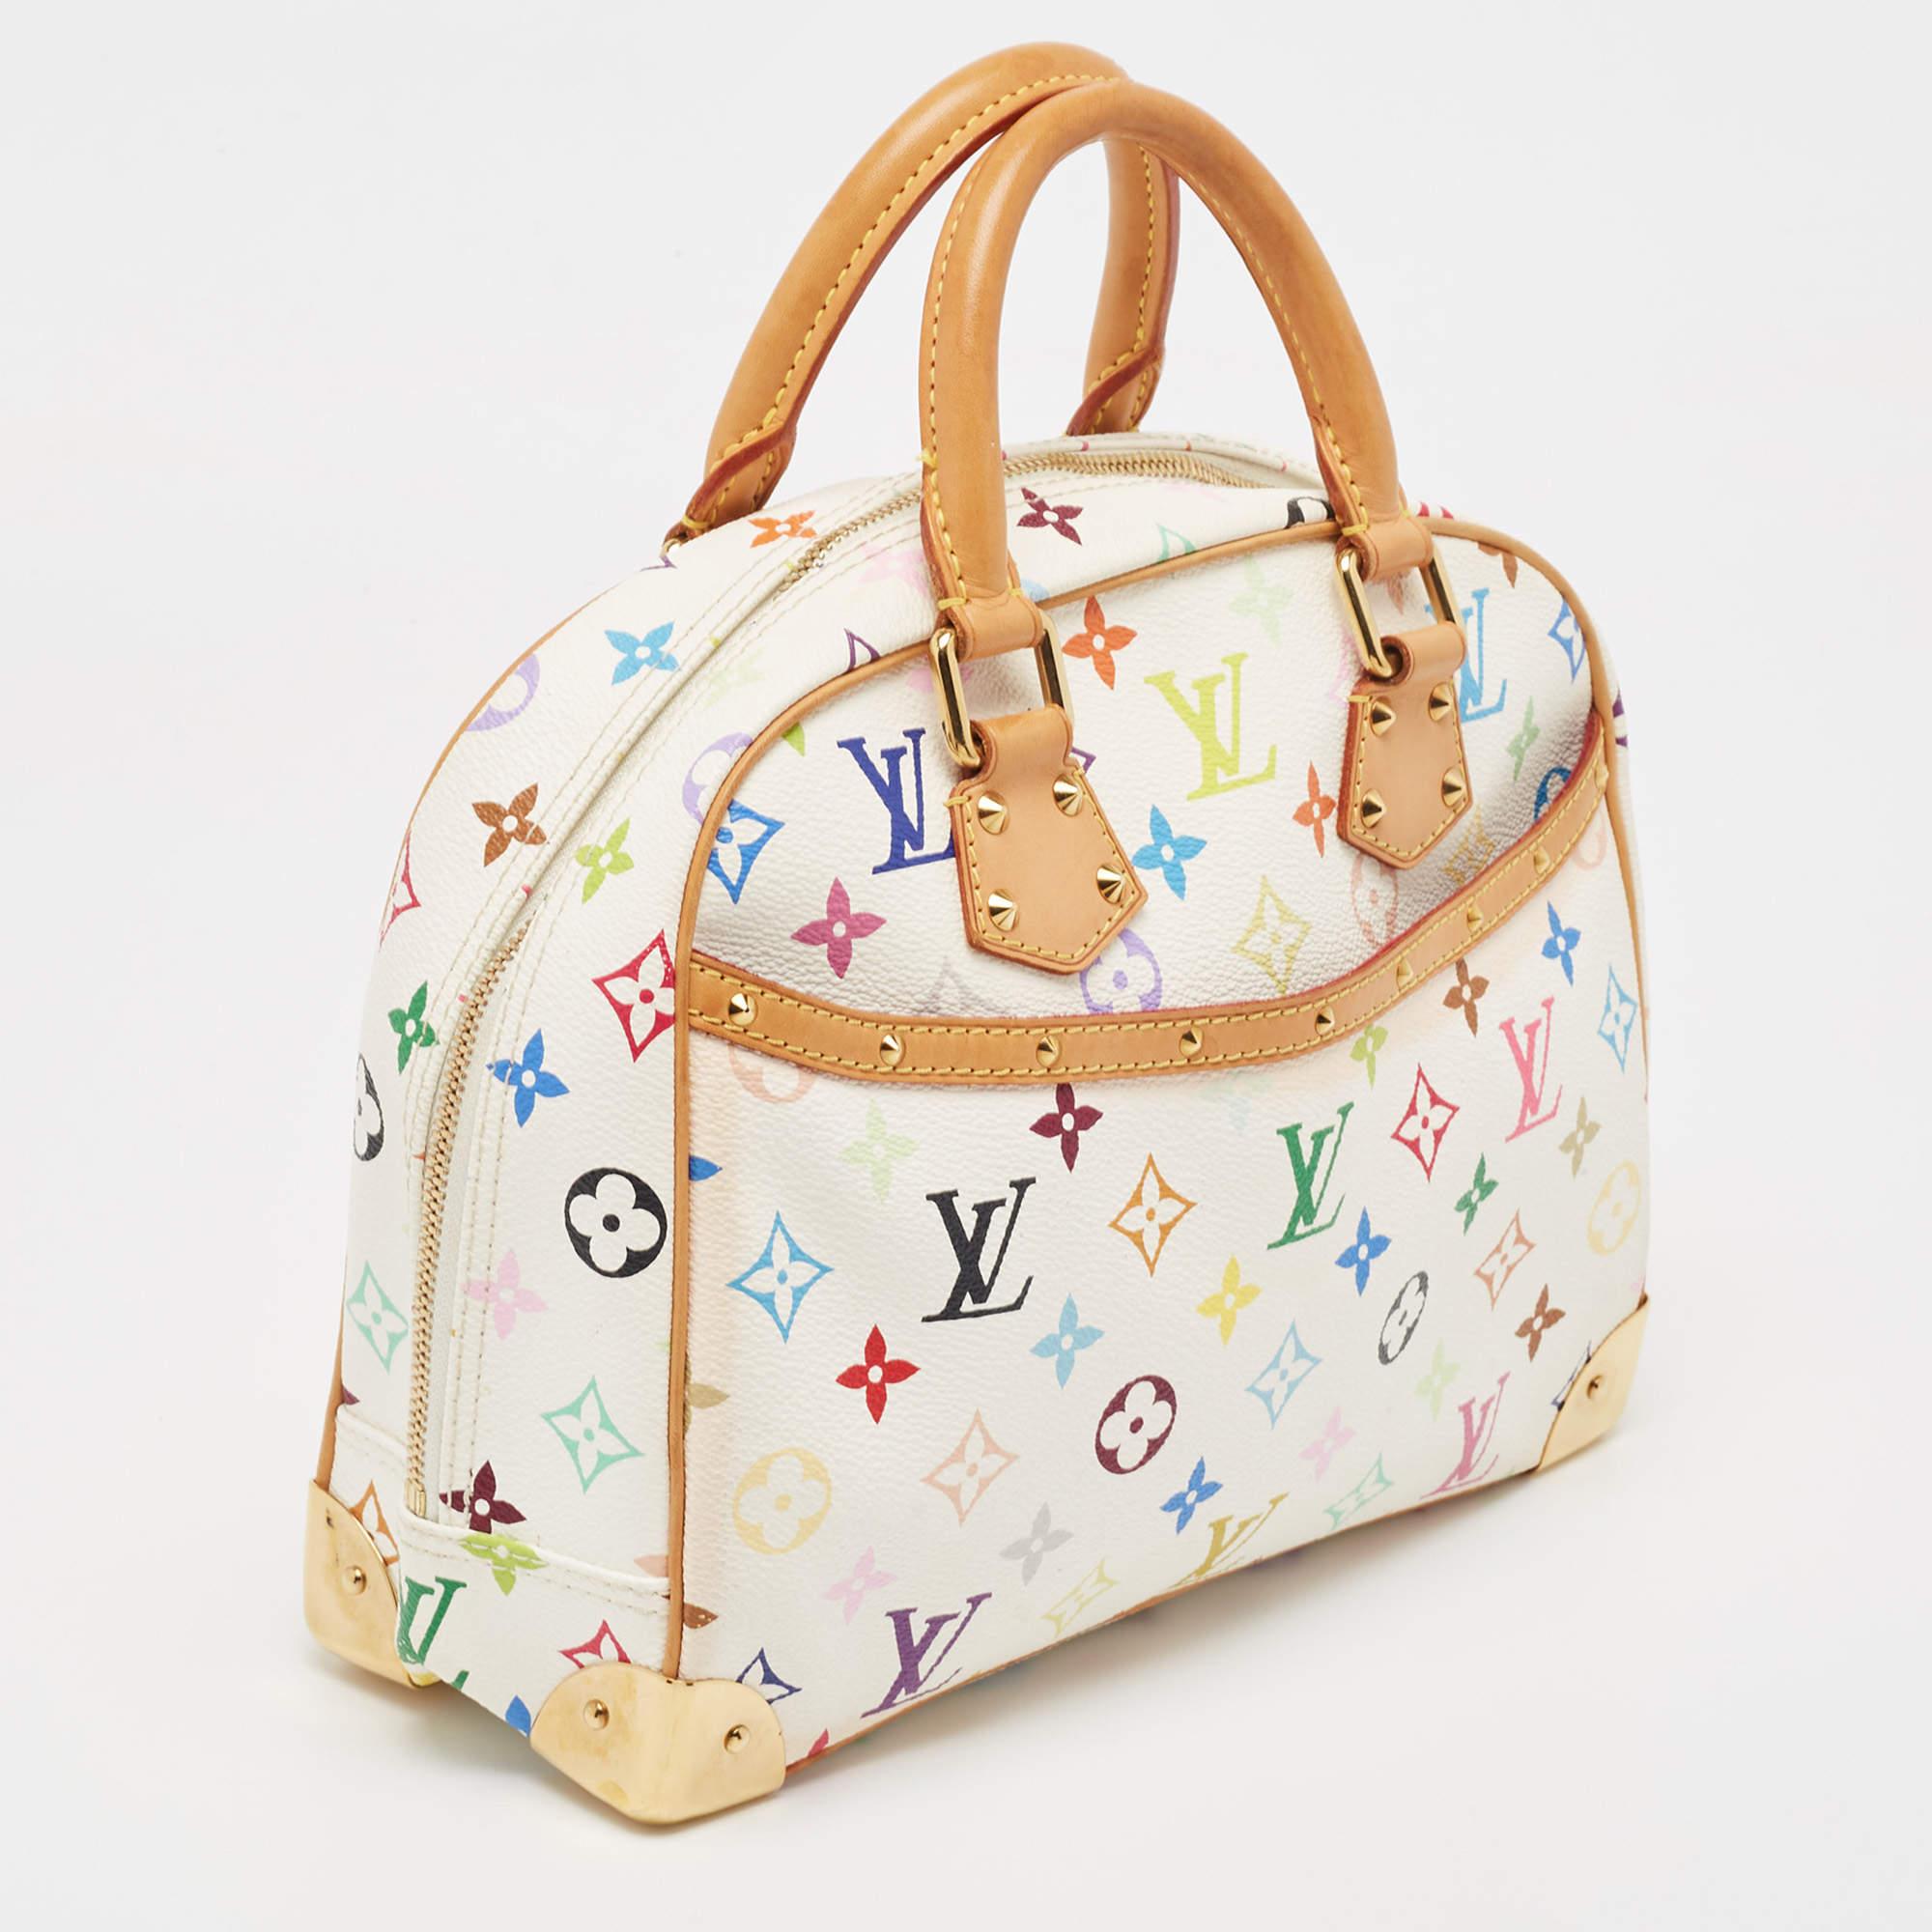 The Louis Vuitton Takashi Murakami Trouville Bag is a luxurious and iconic accessory featuring the vibrant collaboration between Louis Vuitton and Japanese artist Takashi Murakami. The bag showcases the signature LV monogram in a playful multicolor